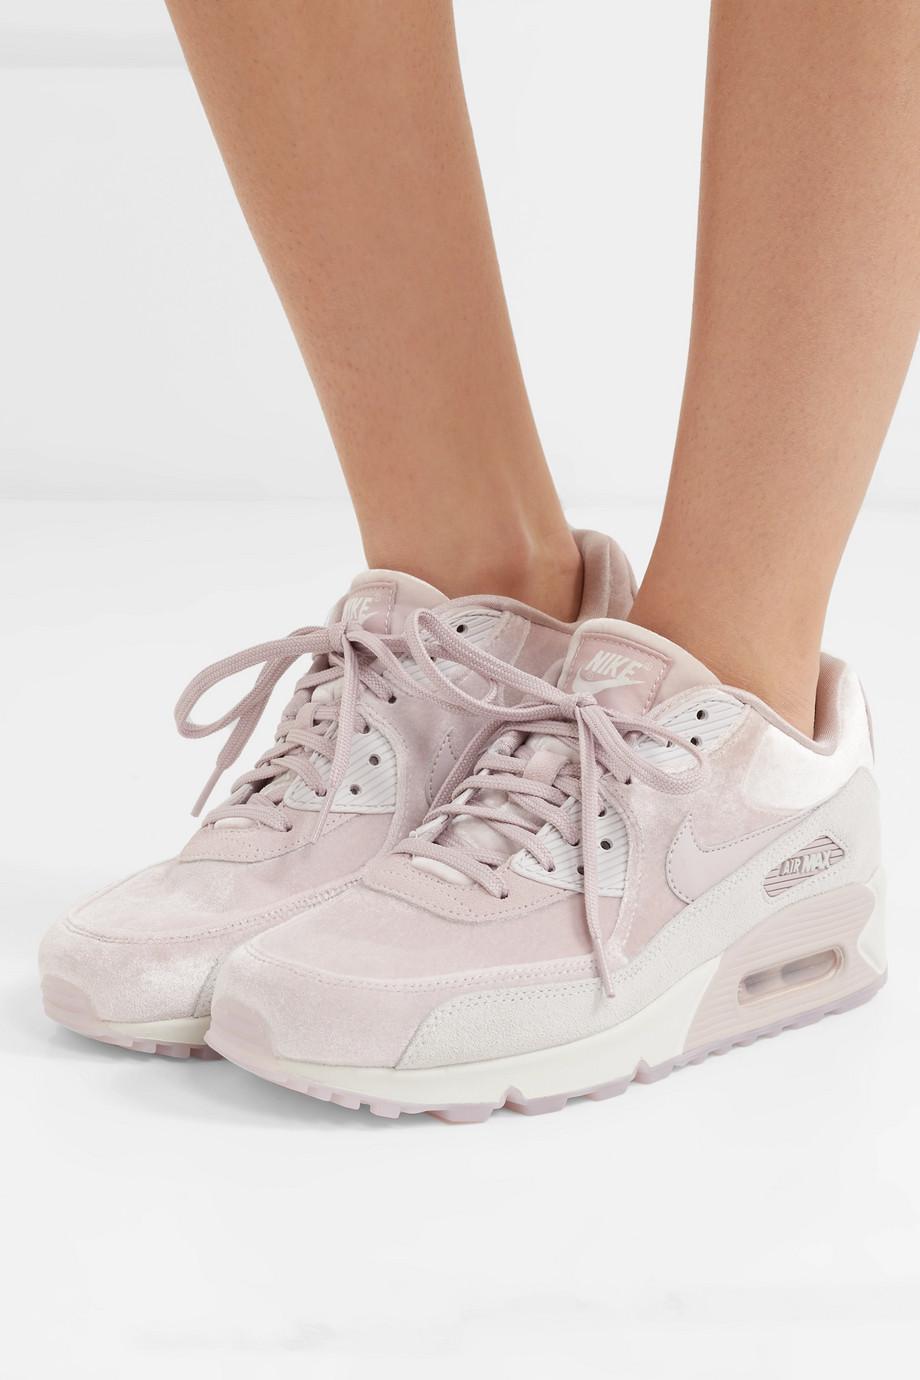 Nike Air Max 90 Lx Velvet And Suede Sneakers in Blush (Pink) - Lyst